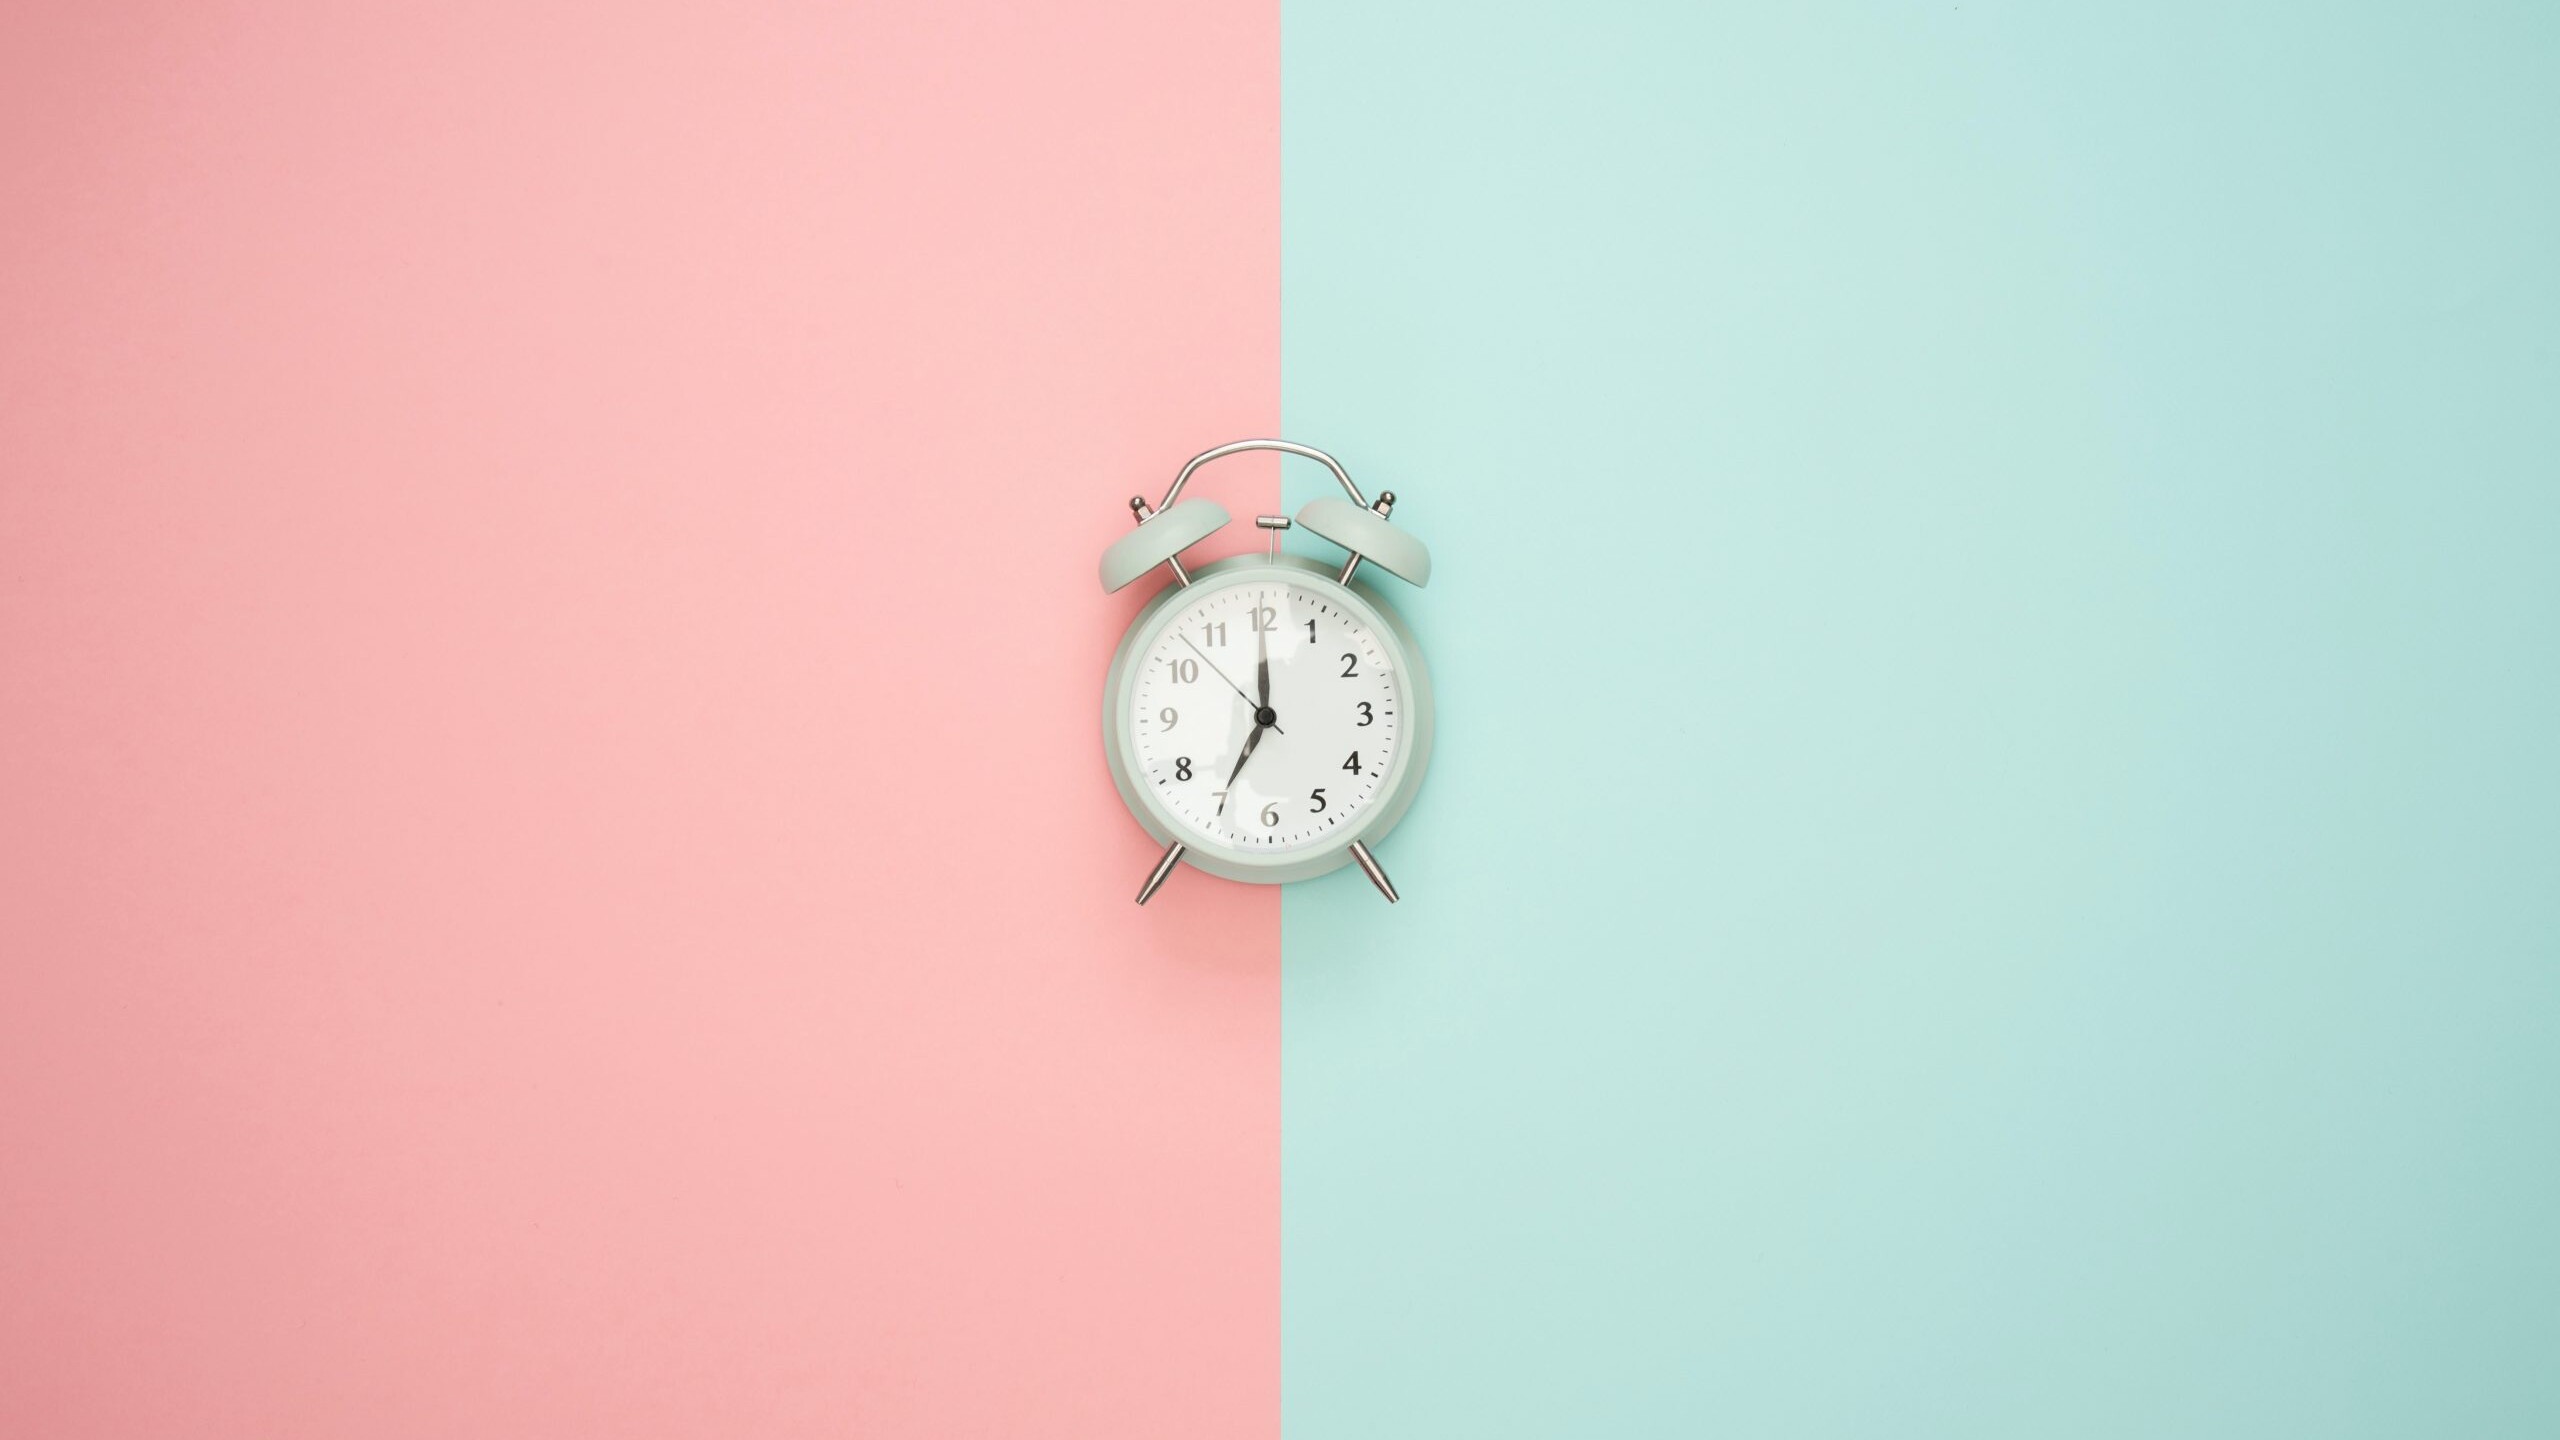 An alarm clock sits on a pink and teal backdrop.